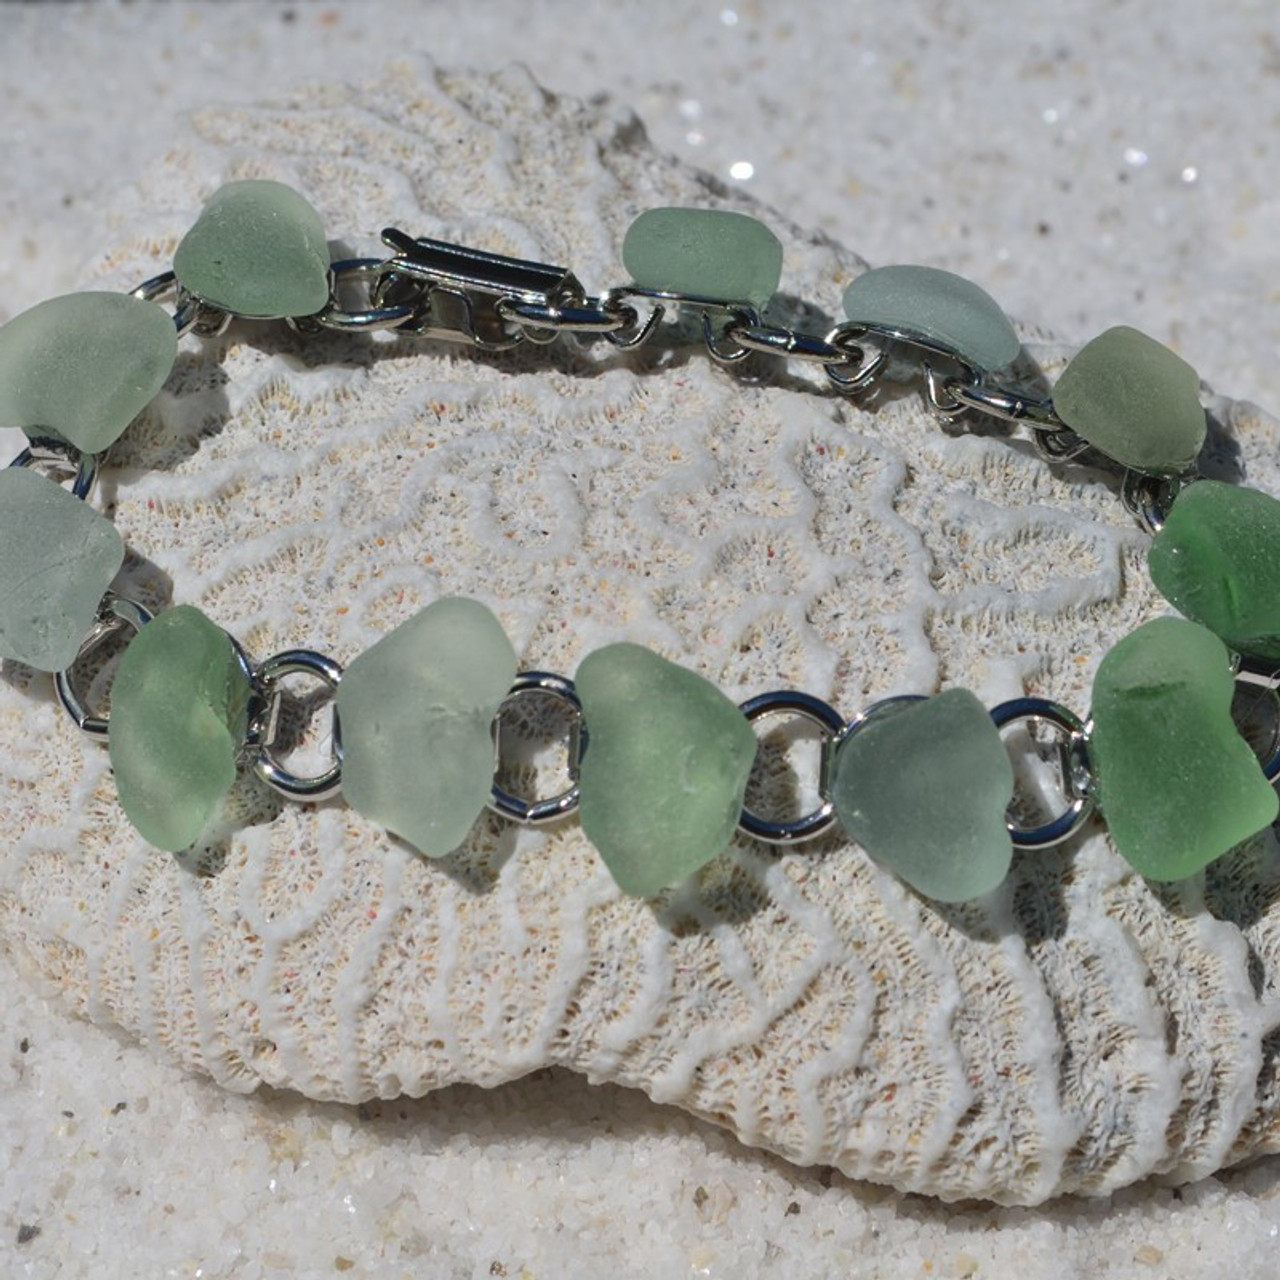 Frosted Aqua and Sea Foam Sea Glass Bracelet - 3 Sizes Available - Made ...